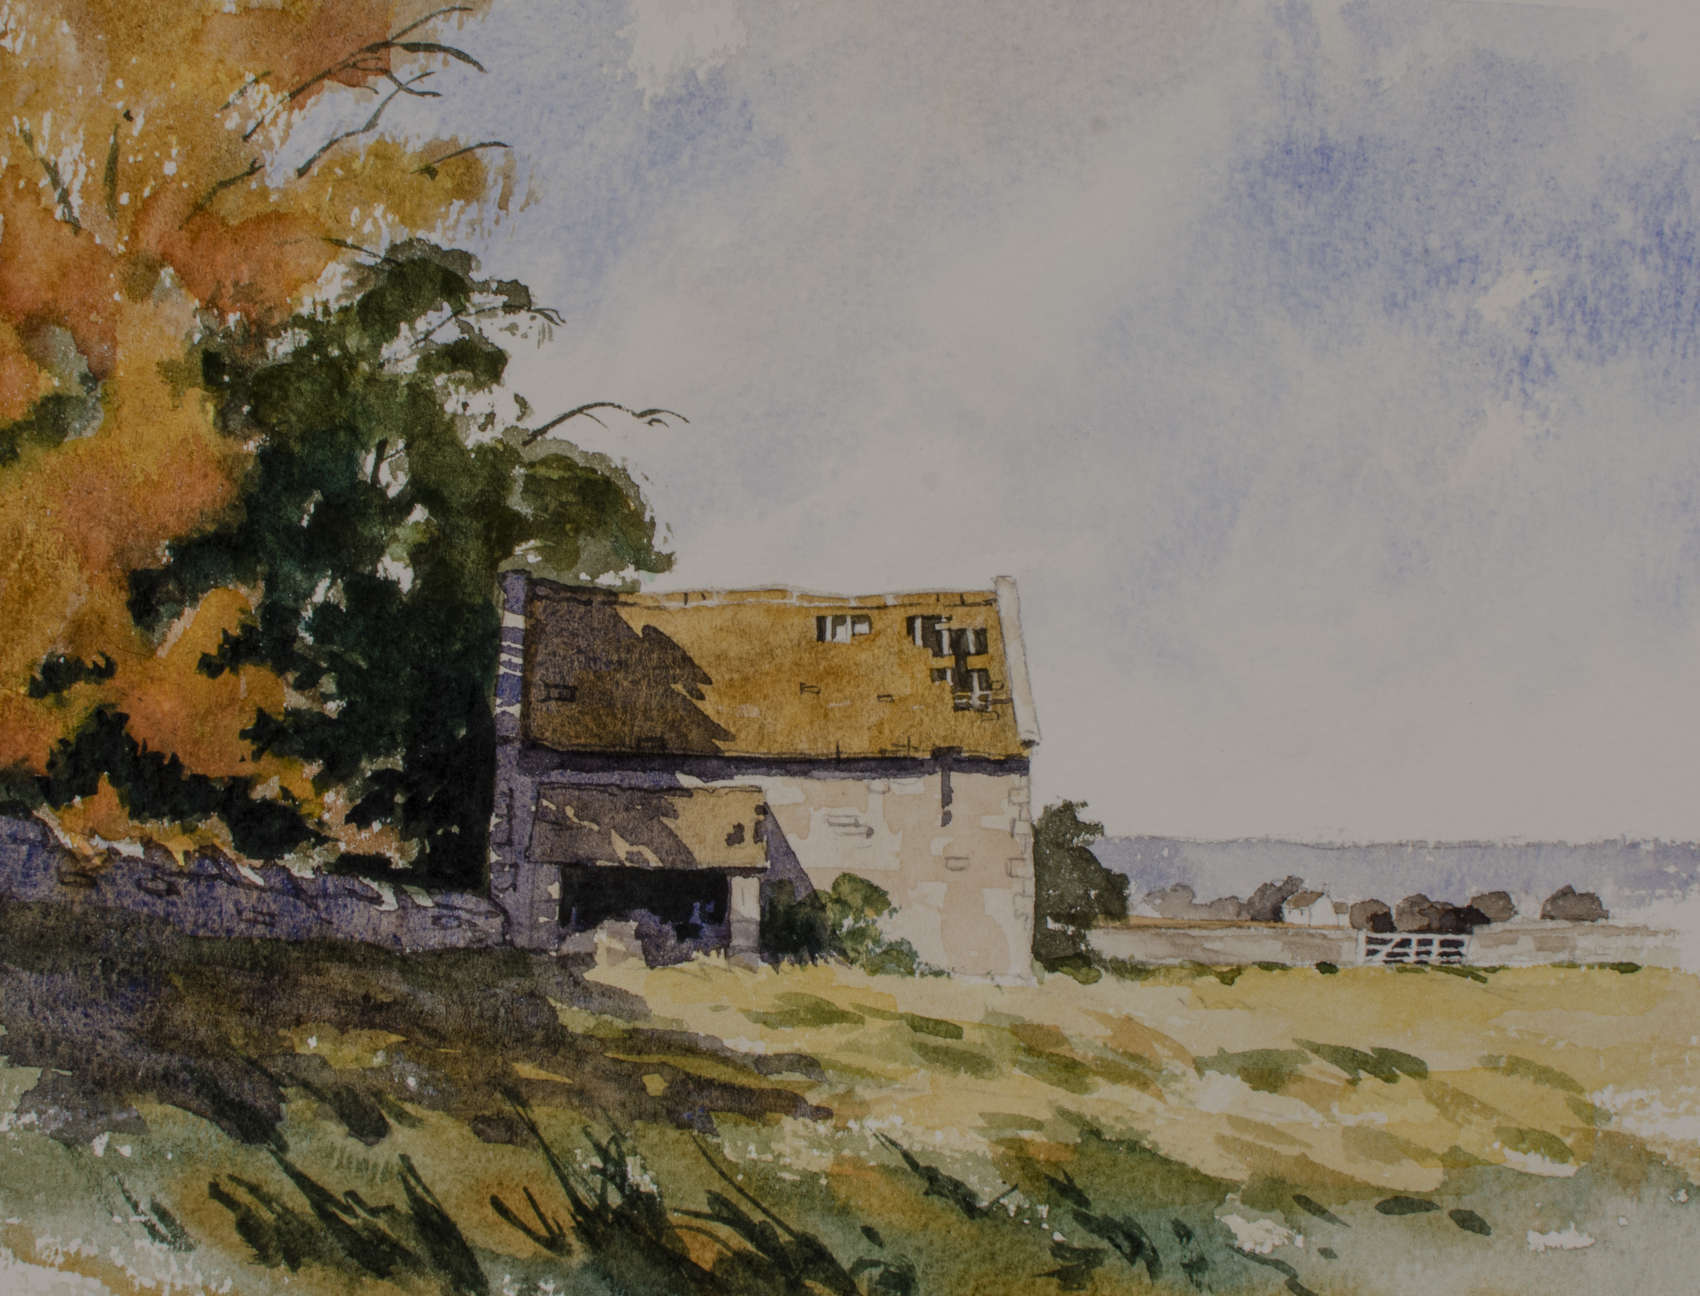 Landscape painting of a run-down farm building in the corner of a field by some trees and a gate